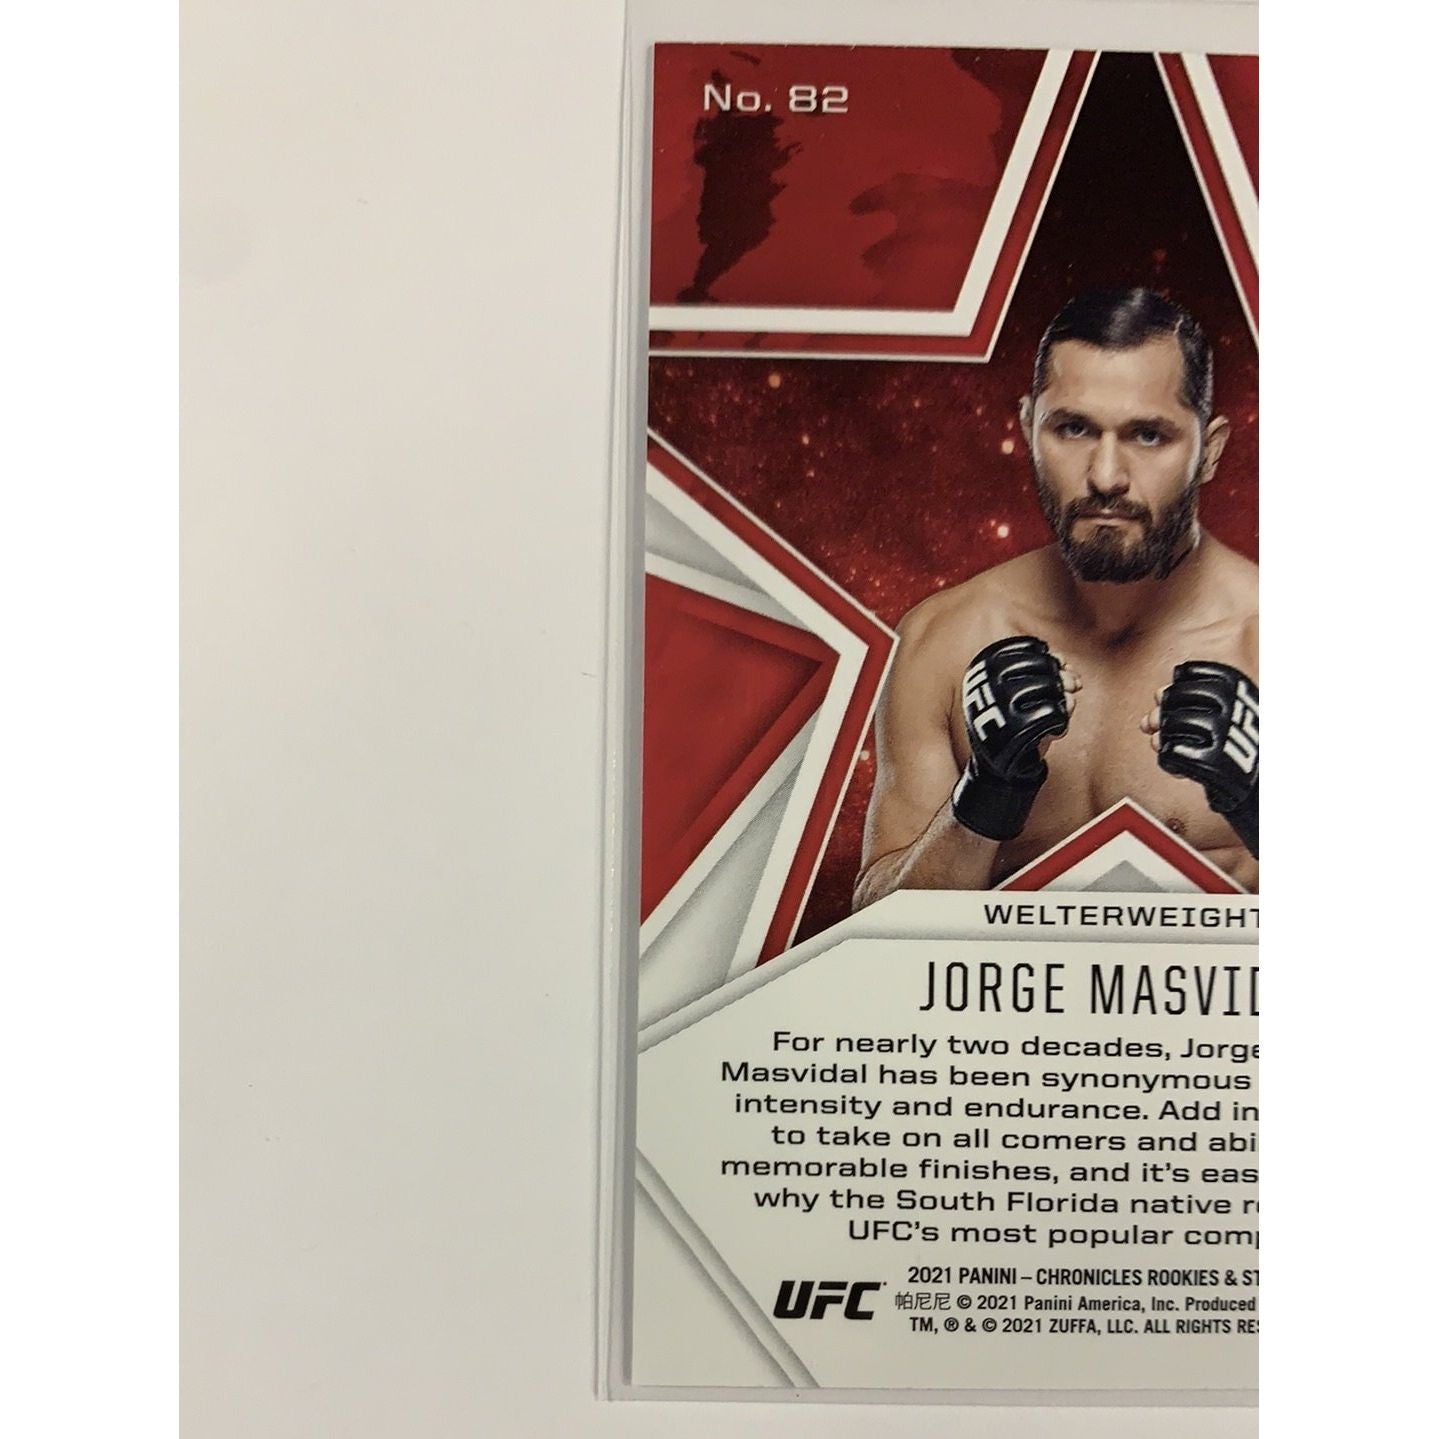  2021 Panini Chronicles Rookies And Stars Jorge Masvidal  Local Legends Cards & Collectibles